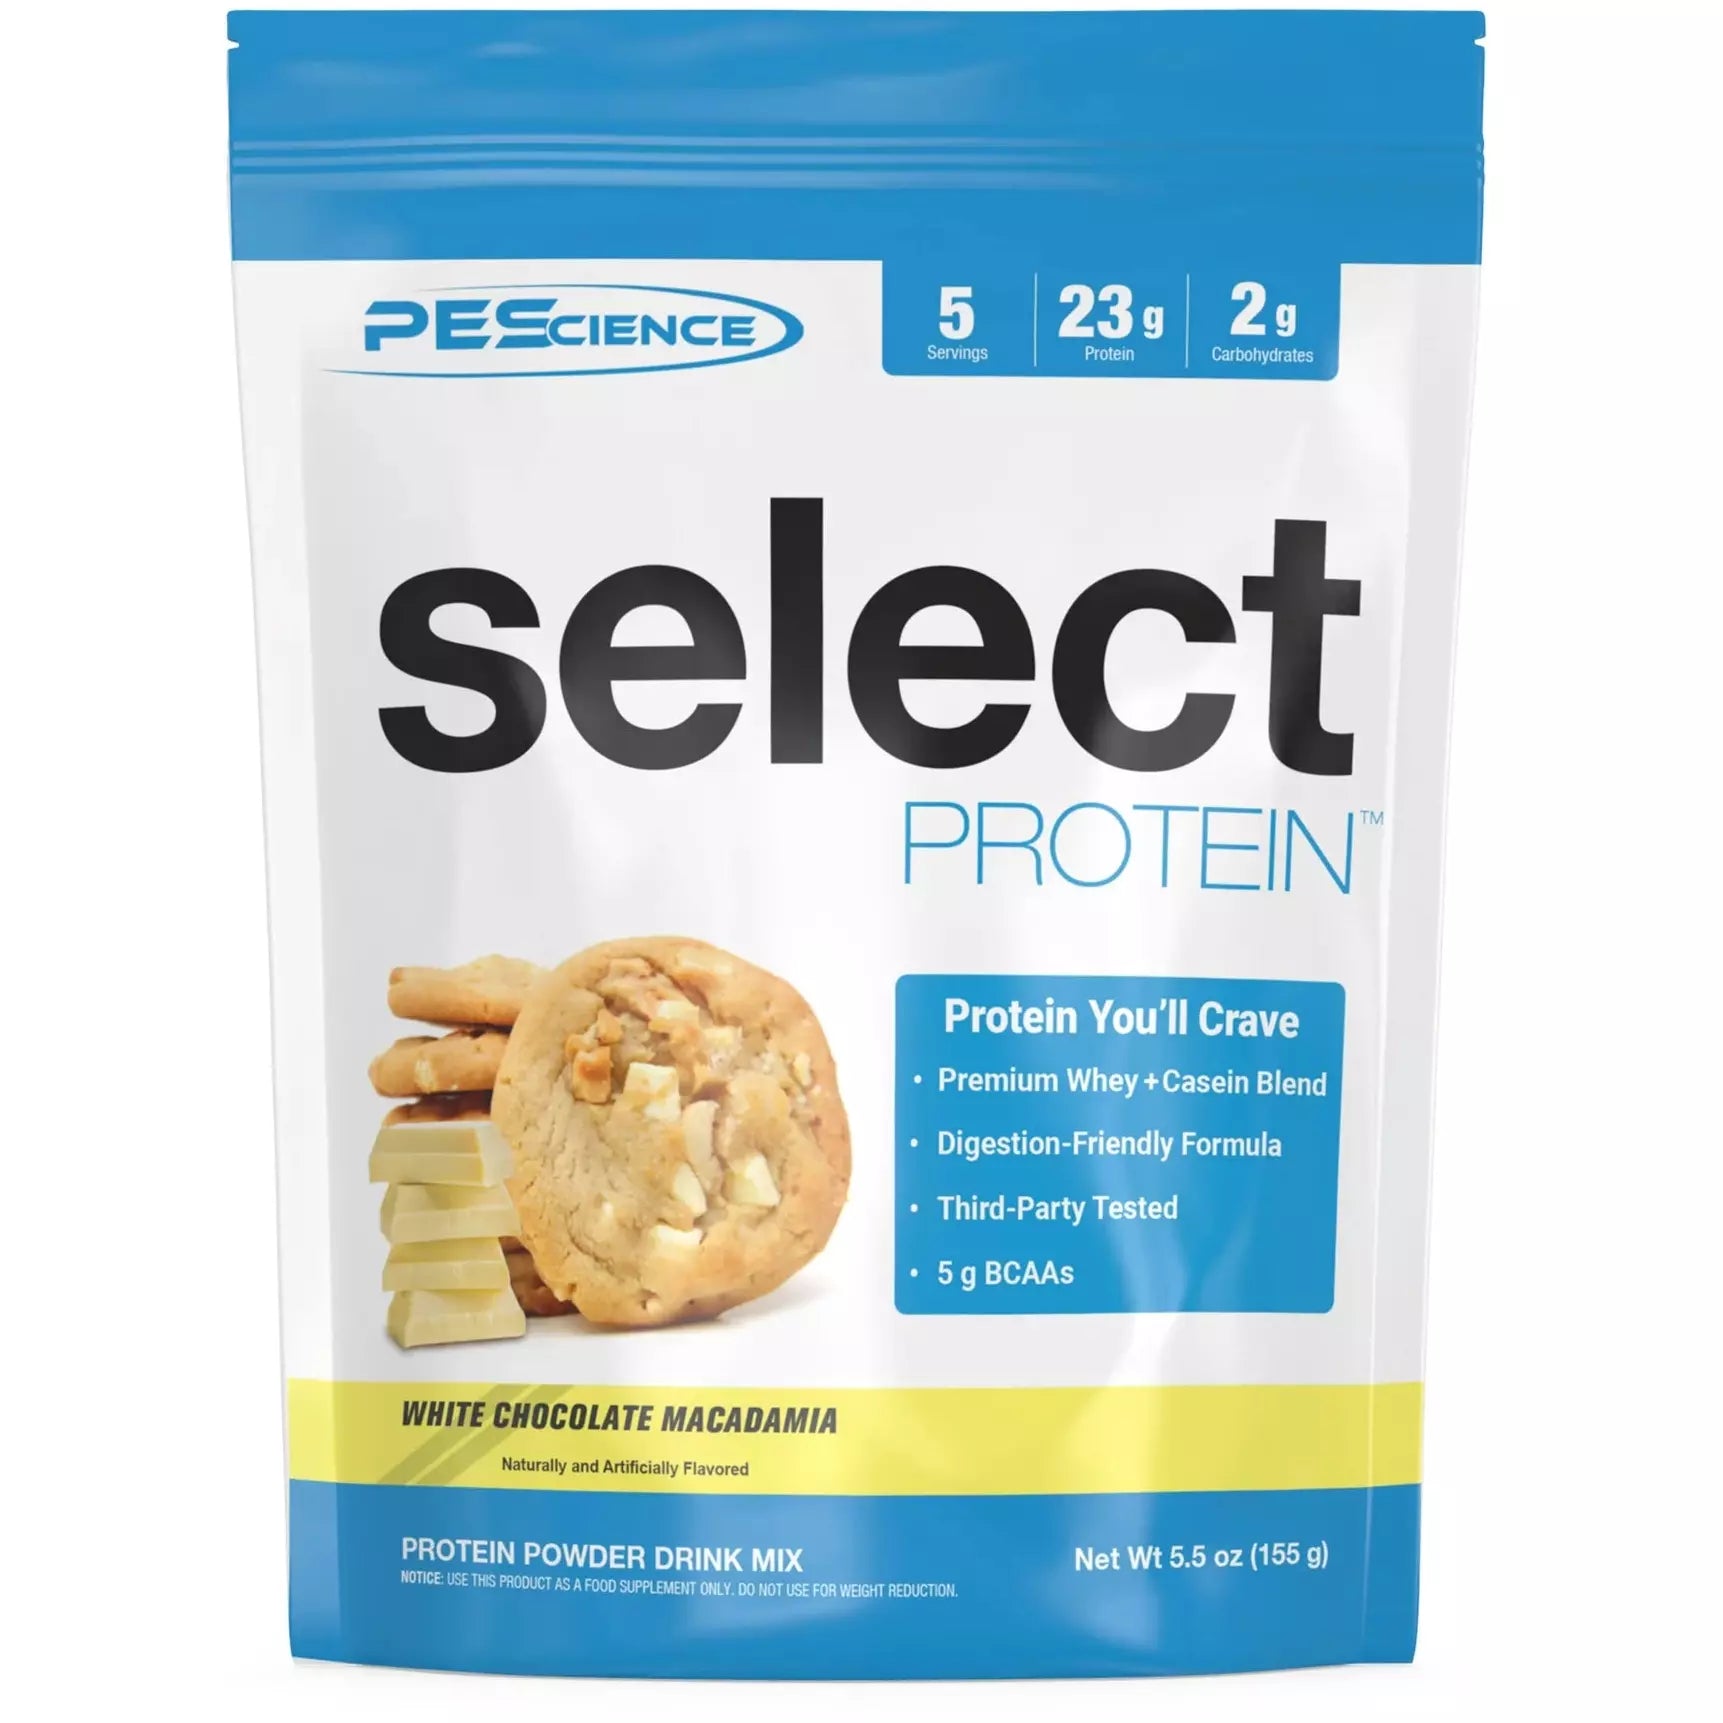 PEScience Select Protein TRIAL SIZE (5 servings) Whey Protein White Chocolate Macadamia PEScience